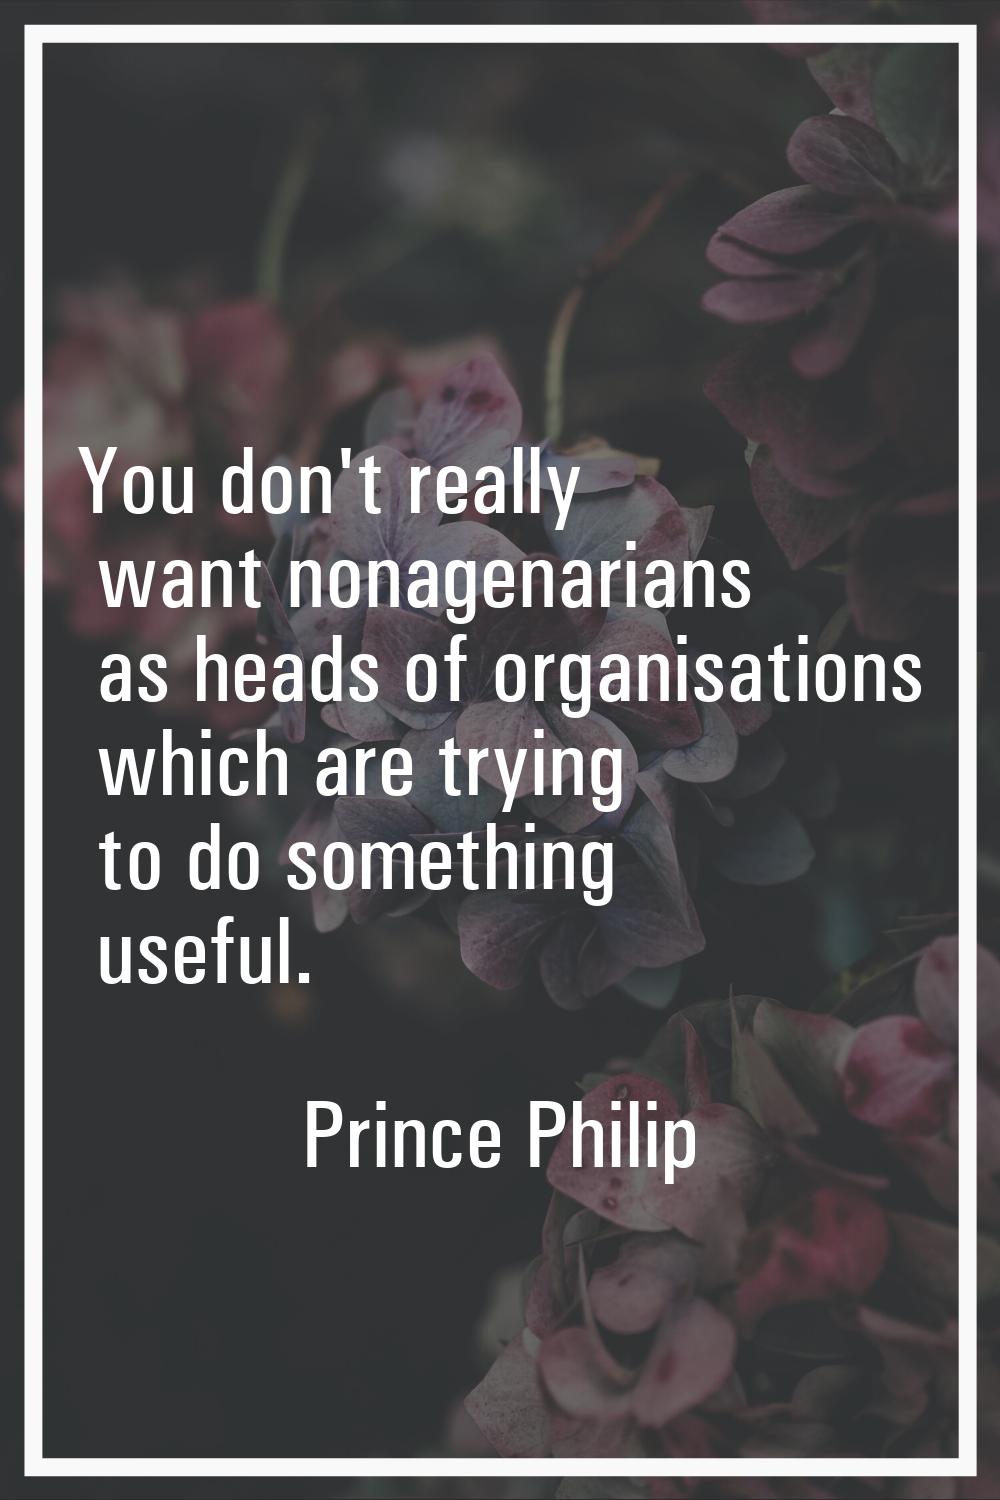 You don't really want nonagenarians as heads of organisations which are trying to do something usef